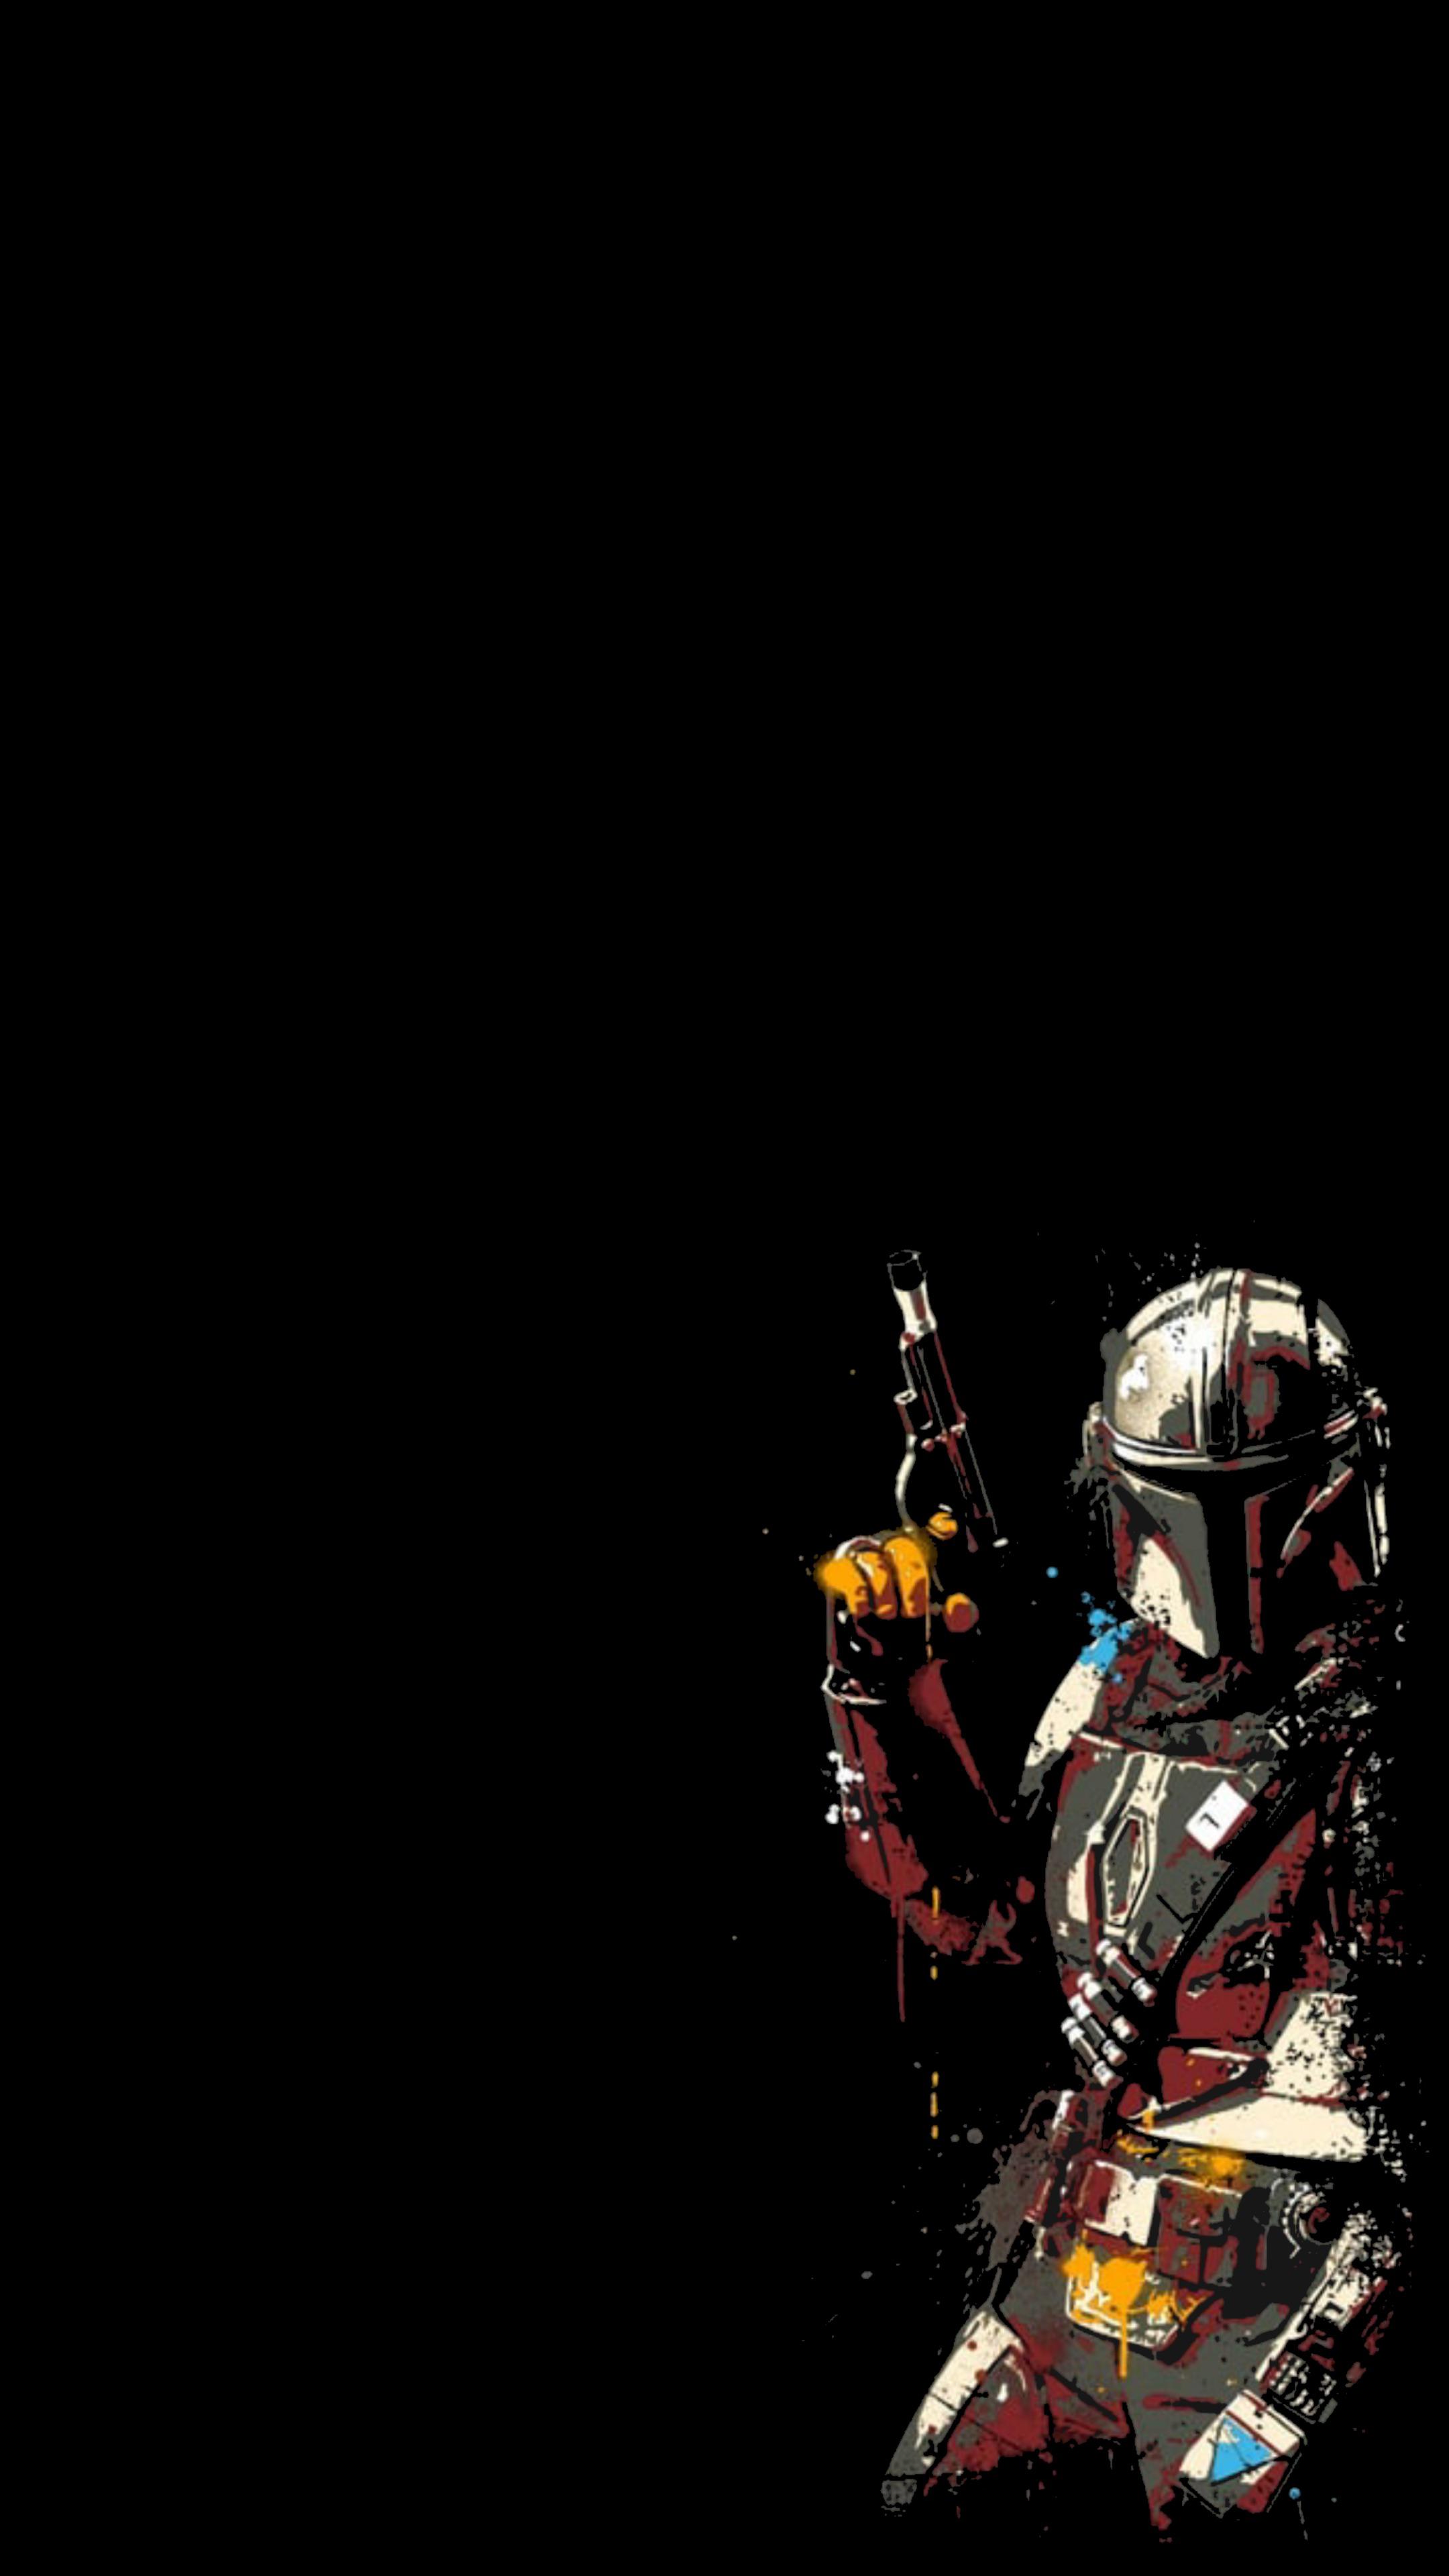 The Mandalorian wallpapers: OLED iPhone screens edition